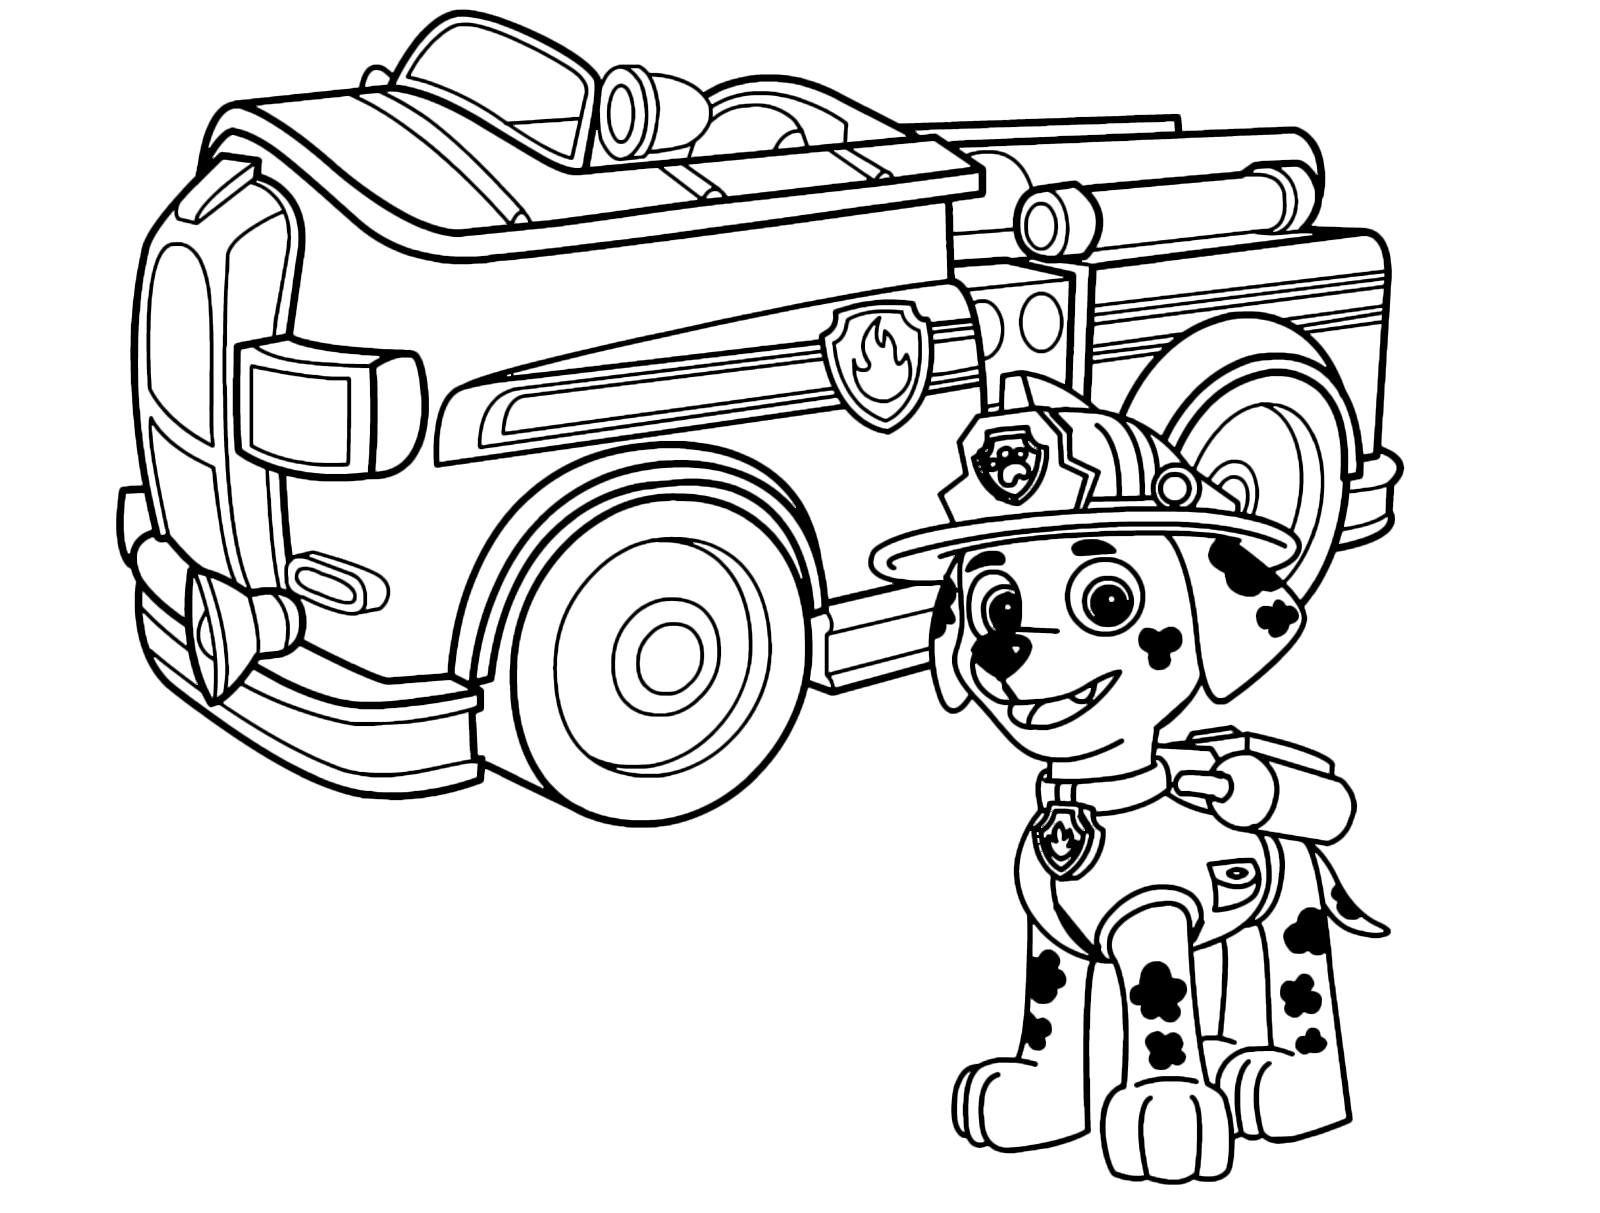 Maestro Tag fat Prøve PAW Patrol - Marshall is in front of his vehicle